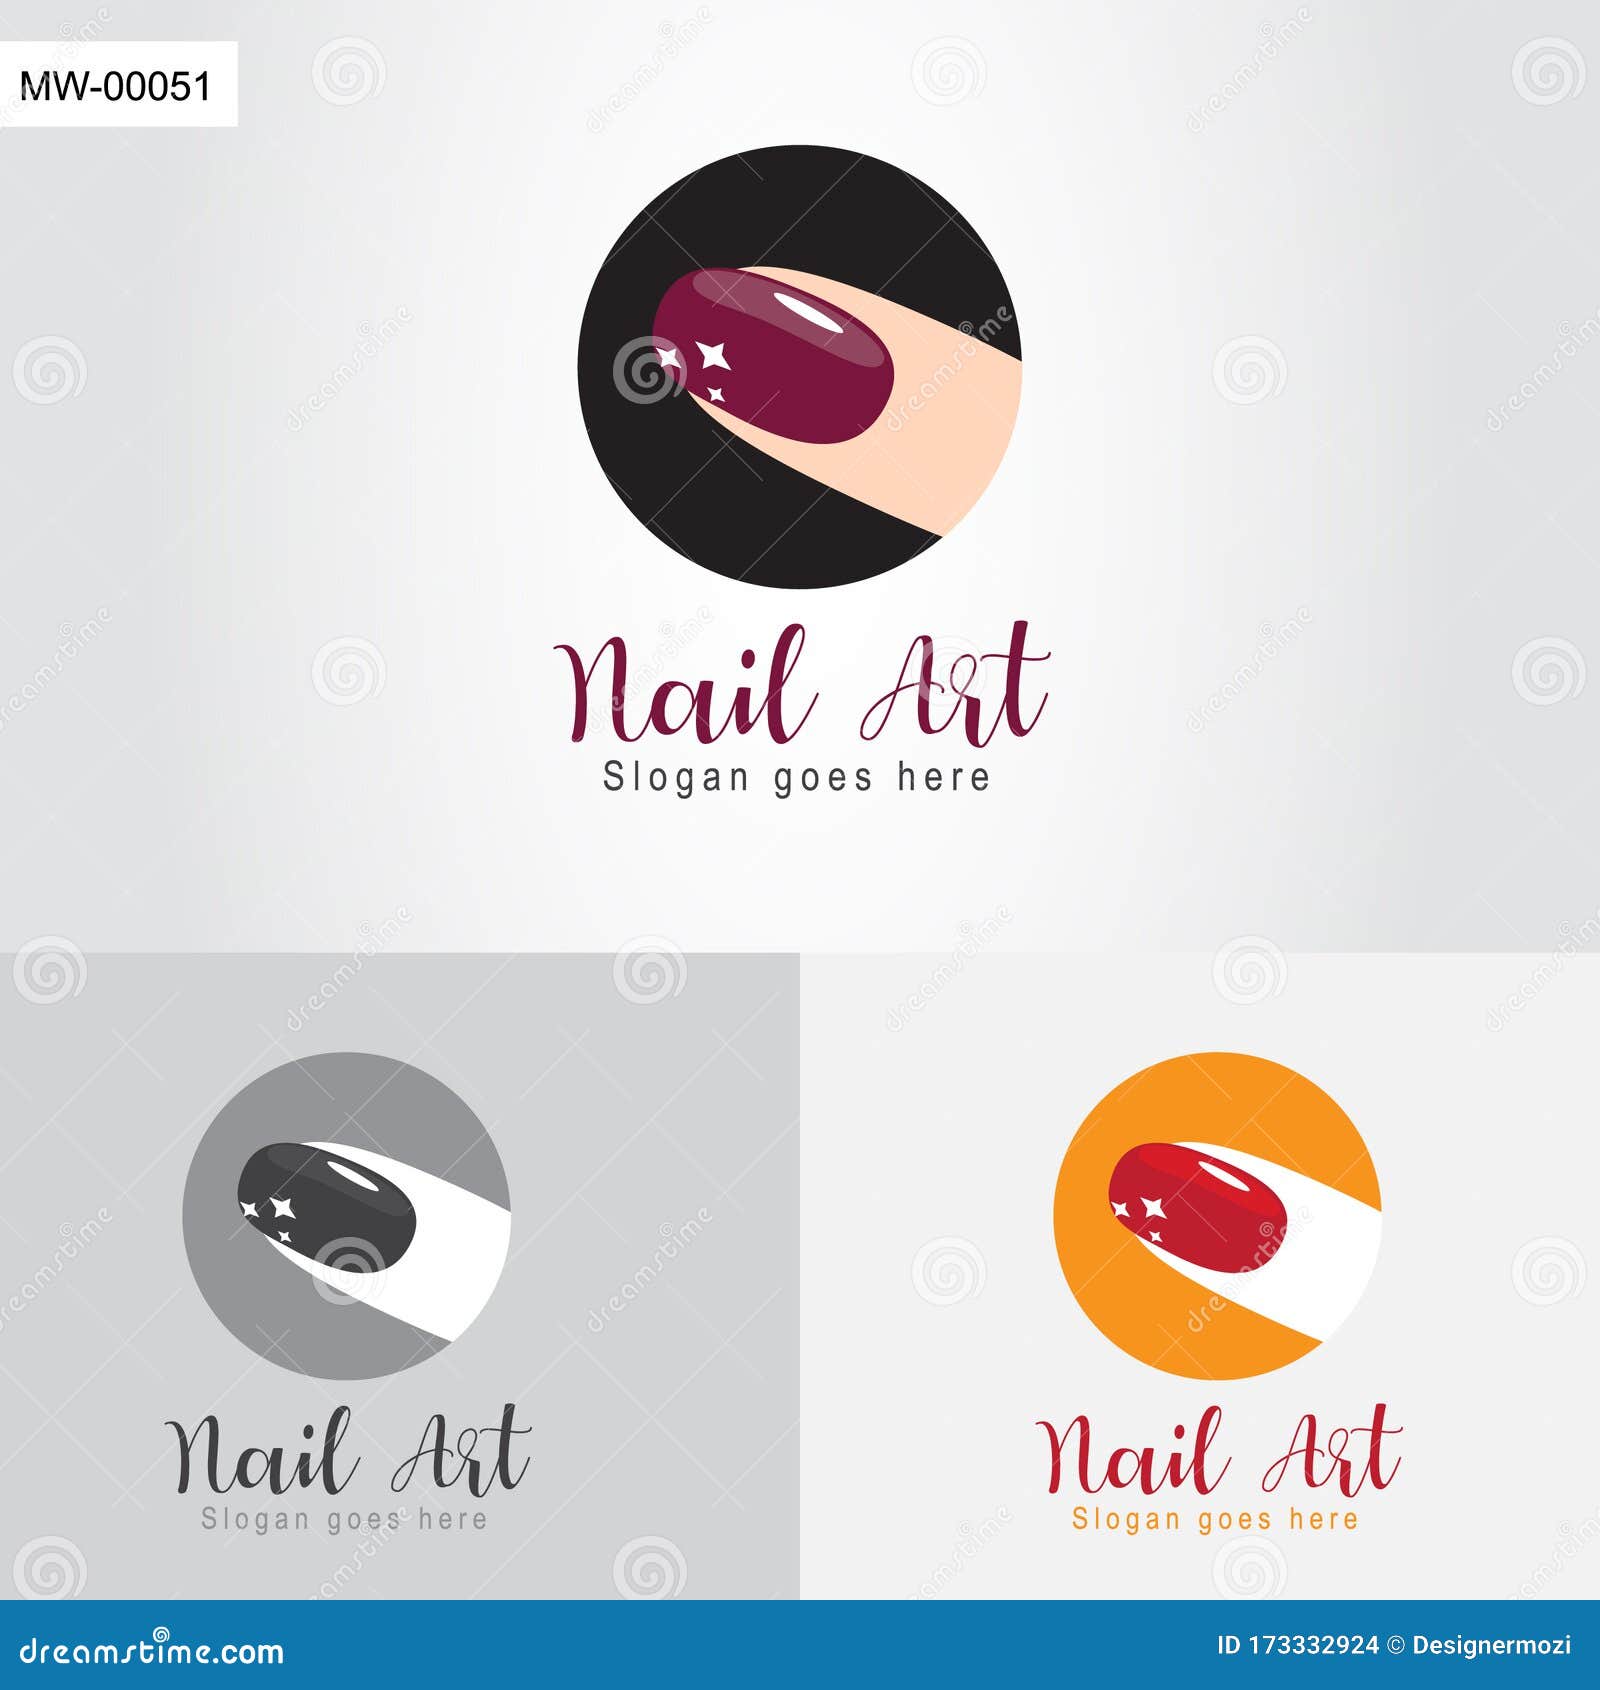 Create Your Own nail artist Logo Free with nails Logo maker